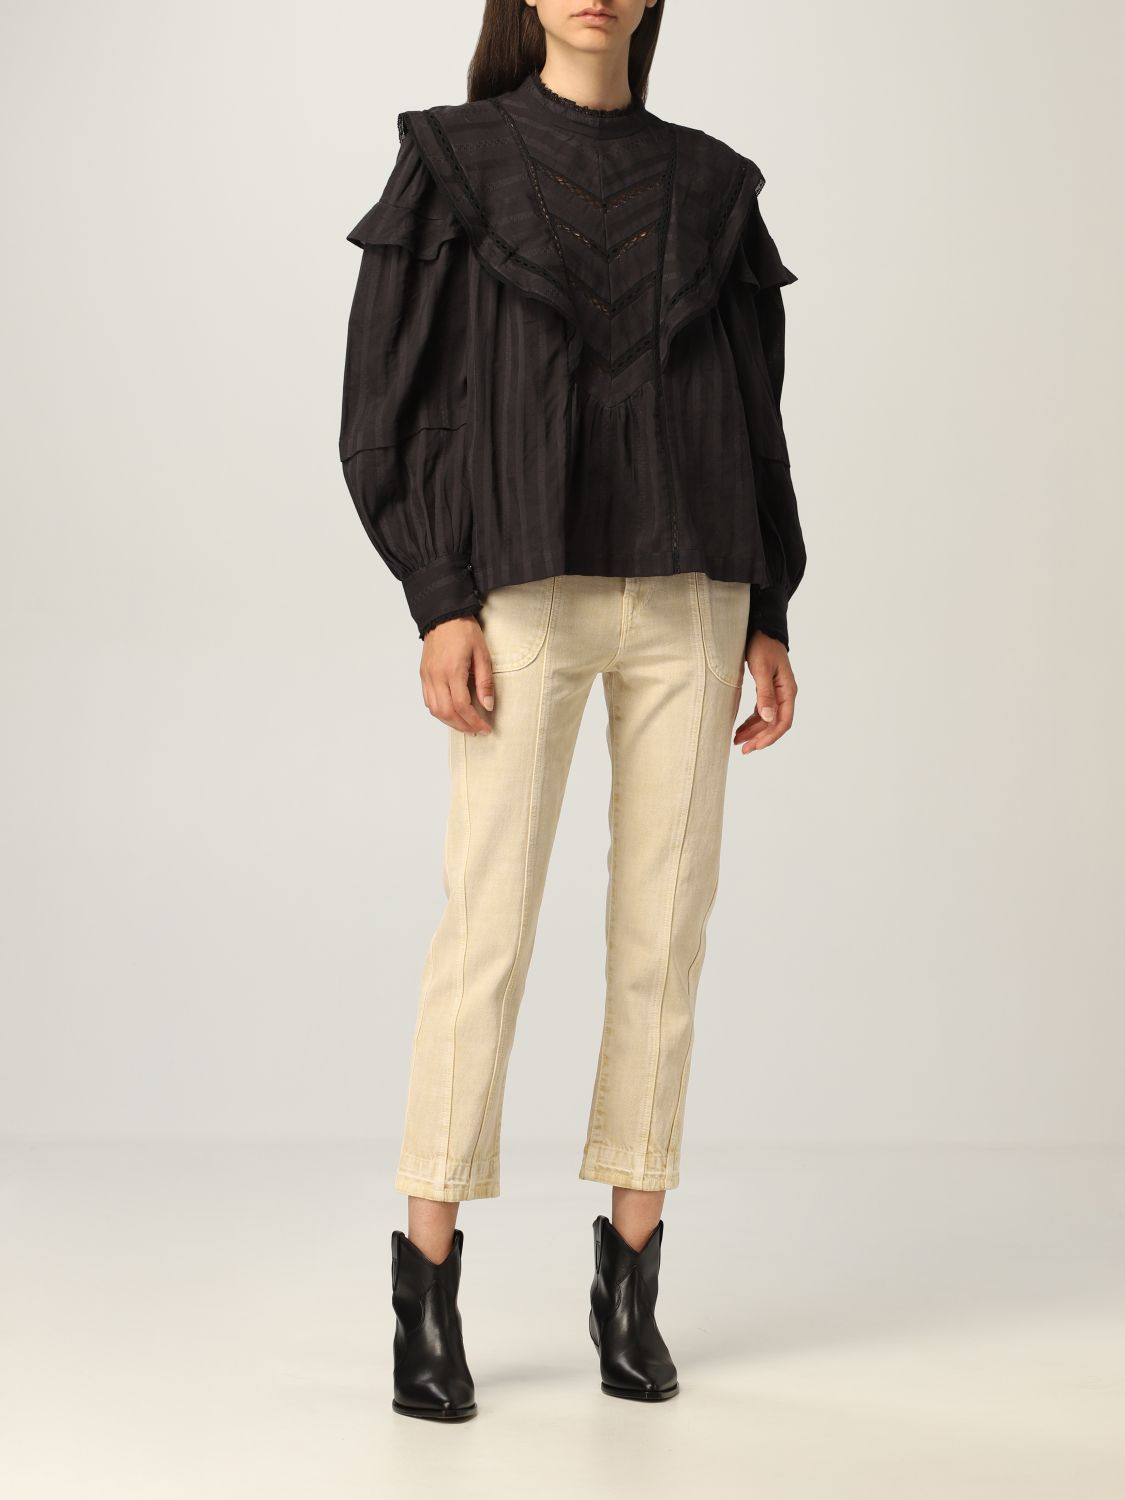 ISABEL ETOILE: cotton blouse with ruffles | Isabel Marant Etoile Women Black | Top Marant Etoile HT182921A025E GIGLIO.COM